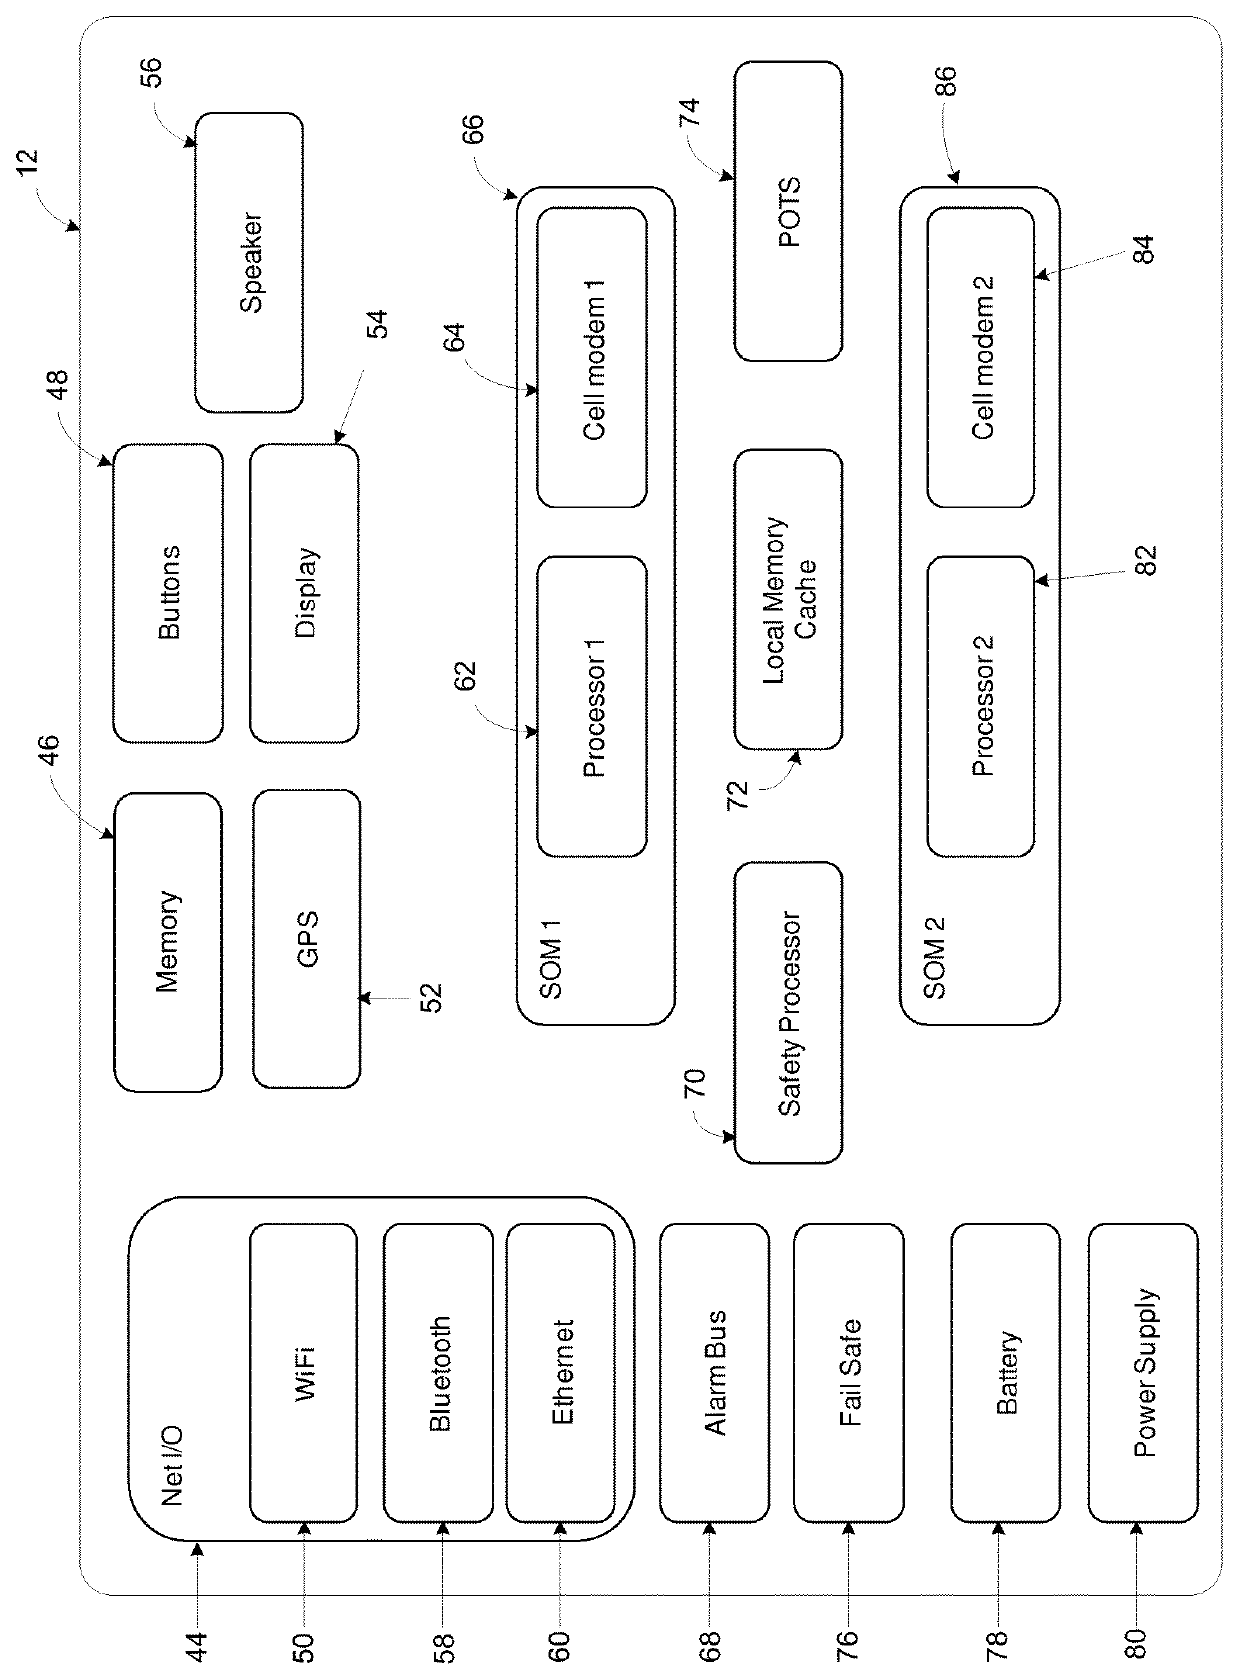 System, method, and apparatus for communicating data